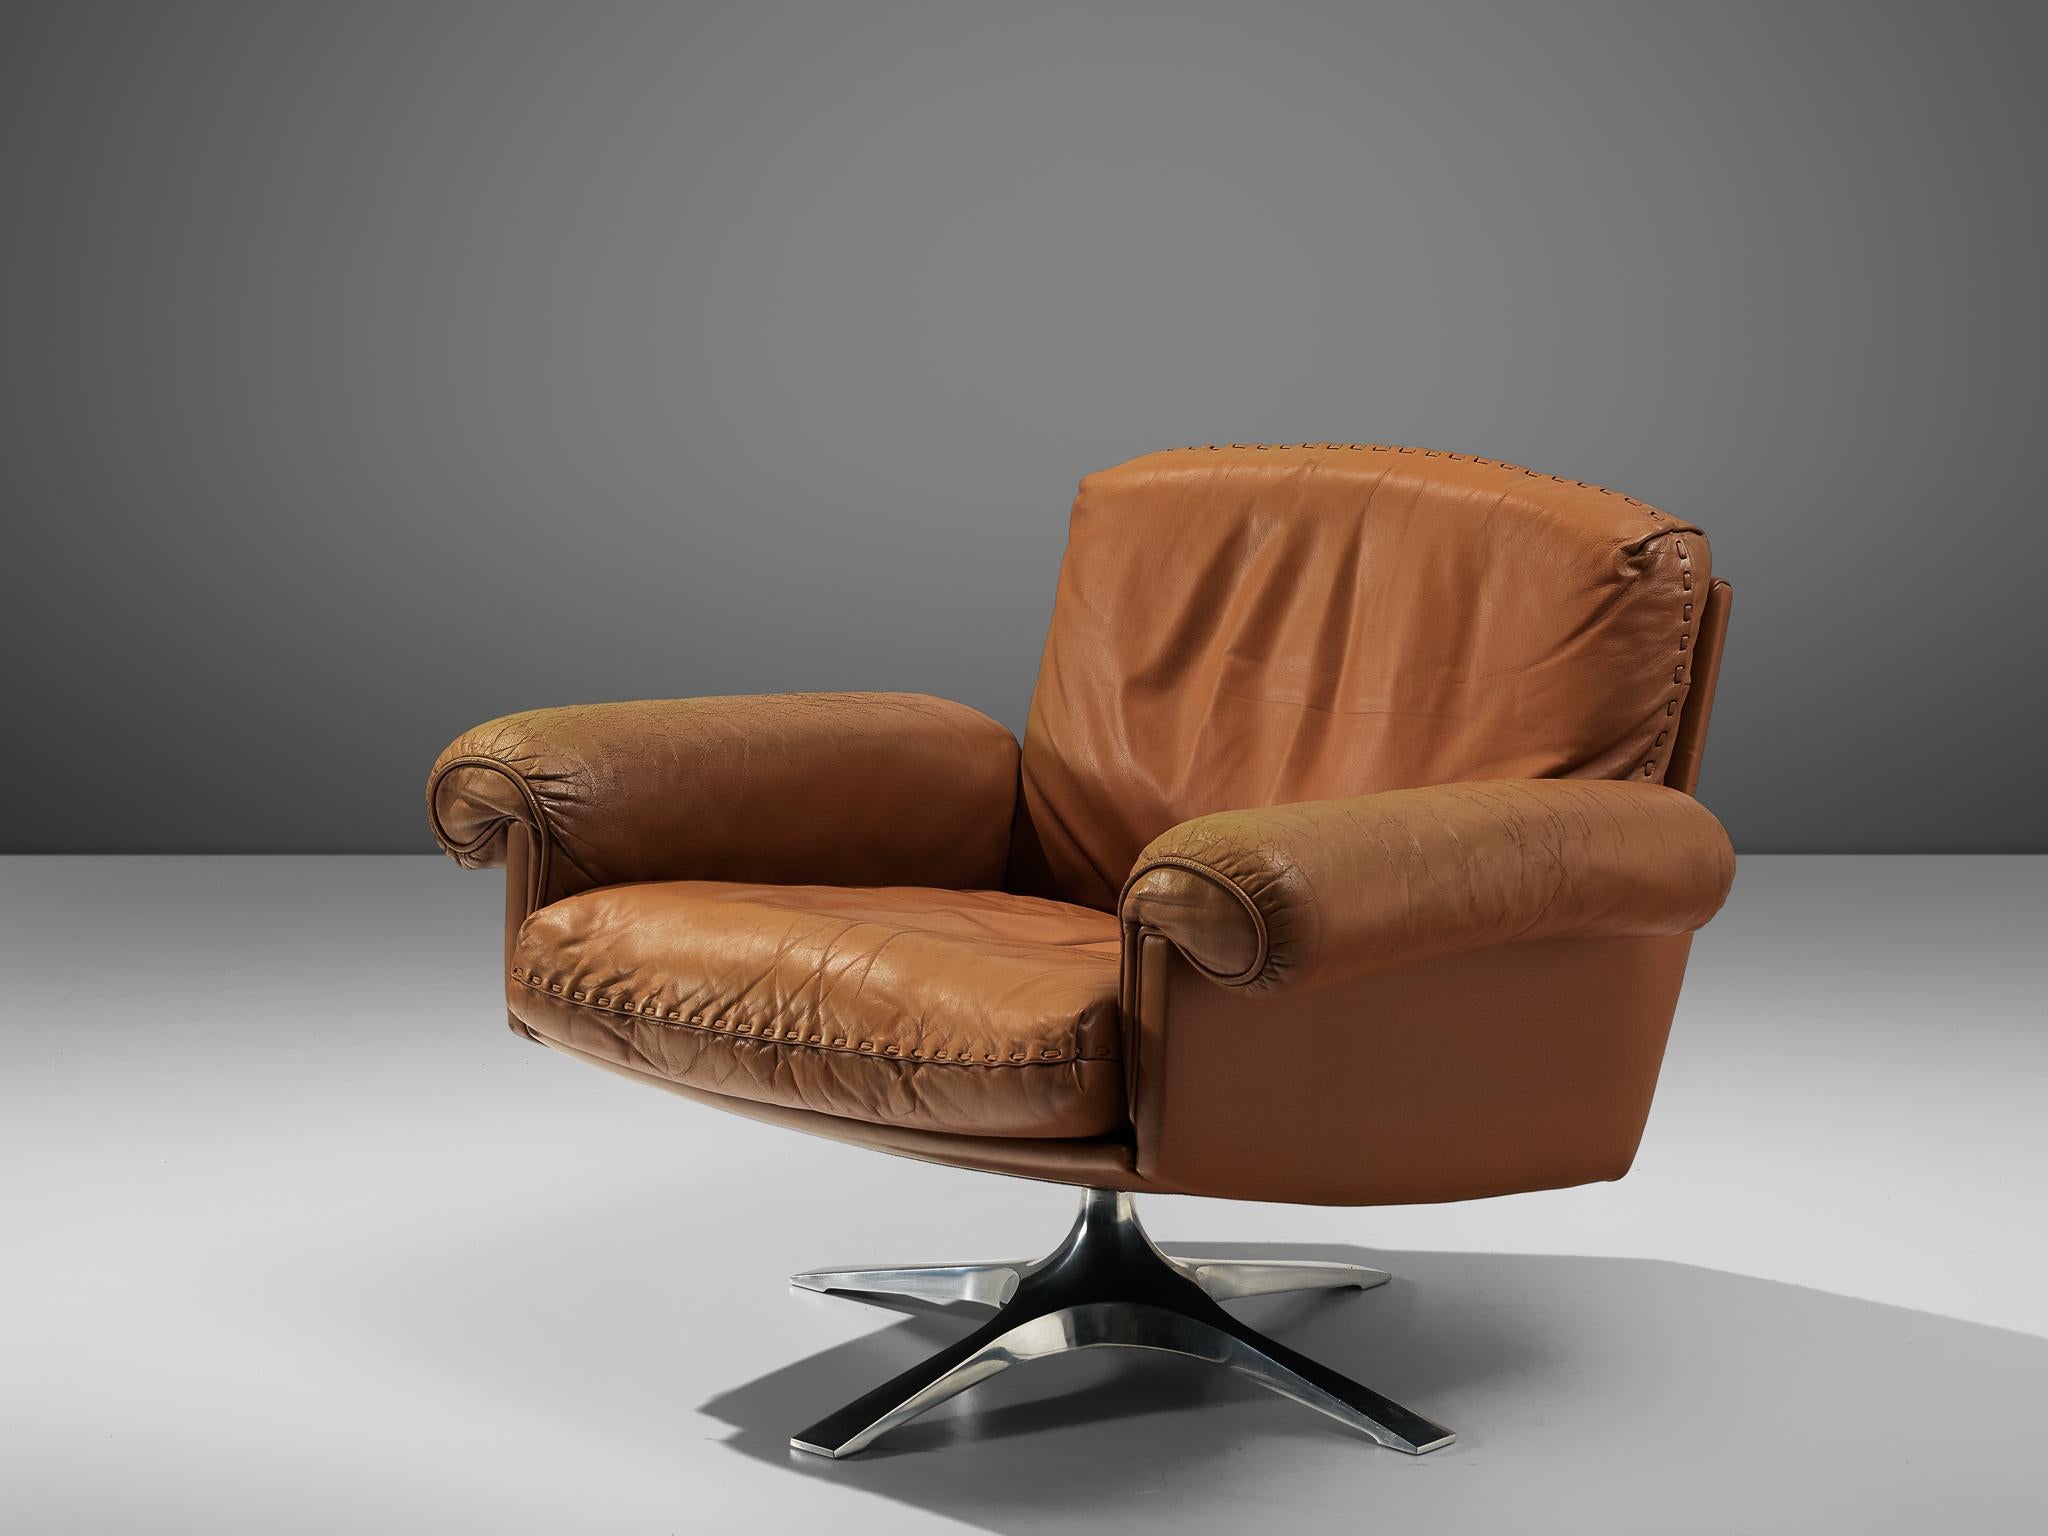 De Sede, DS31 lounge chair, leather and metal, Switzerland, 1970s

Highly comfortable DS31 swivel chair brown leather by De Sede. The design is simplistic, yet very modern. The tilted seat is wide with outstanding, curved armrests. The seat is